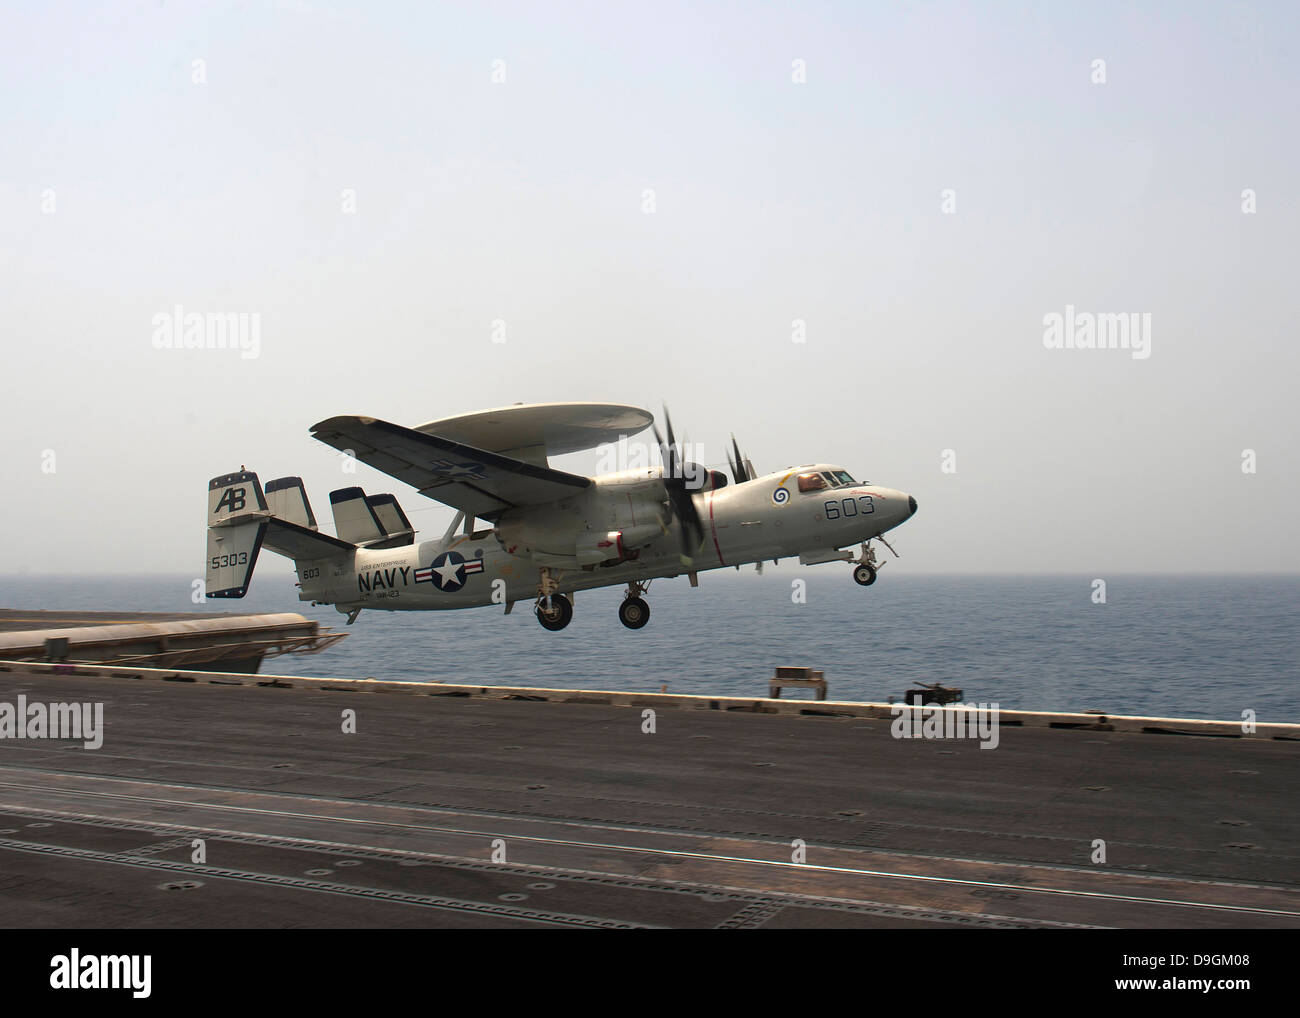 August 15, 2012 - An E-2C Hawkeye takes off from the flight deck of the aircraft carrier USS Enterprise (CVN 65). Stock Photo